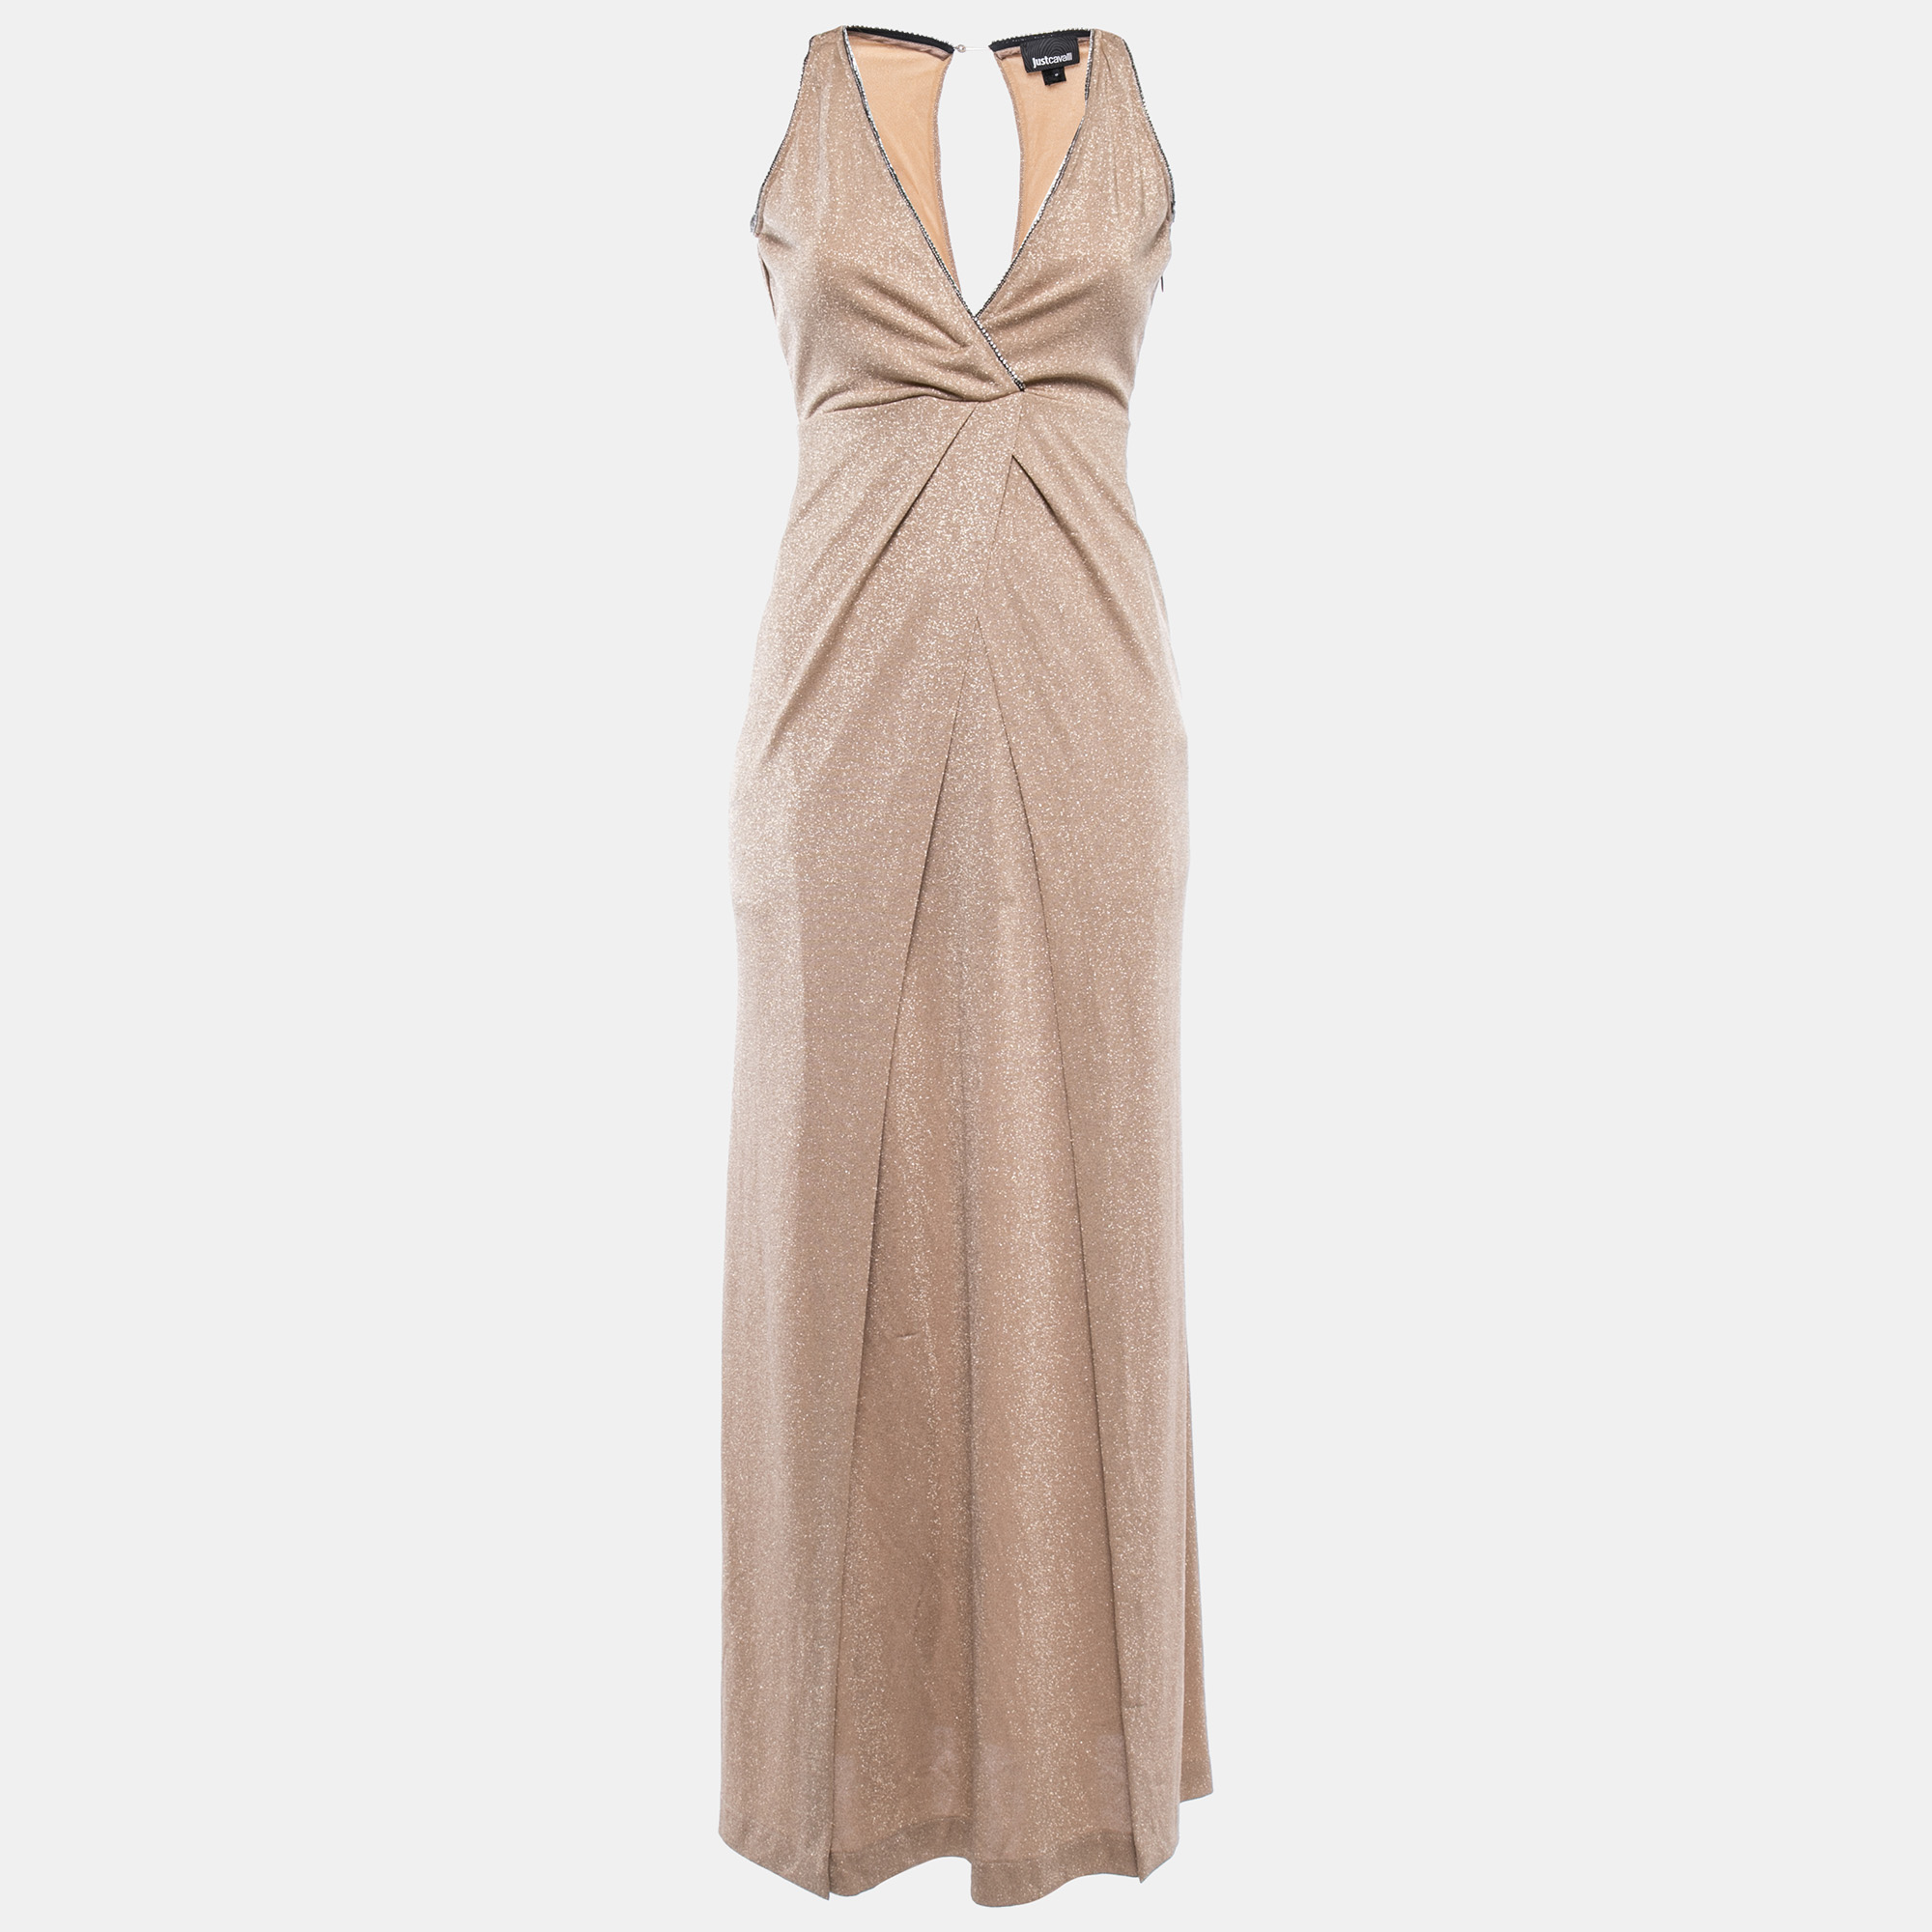 Pre-owned Just Cavalli Gold Crystals Embellished Lurex Knit Sleeveless Cut-out Maxi Dress S